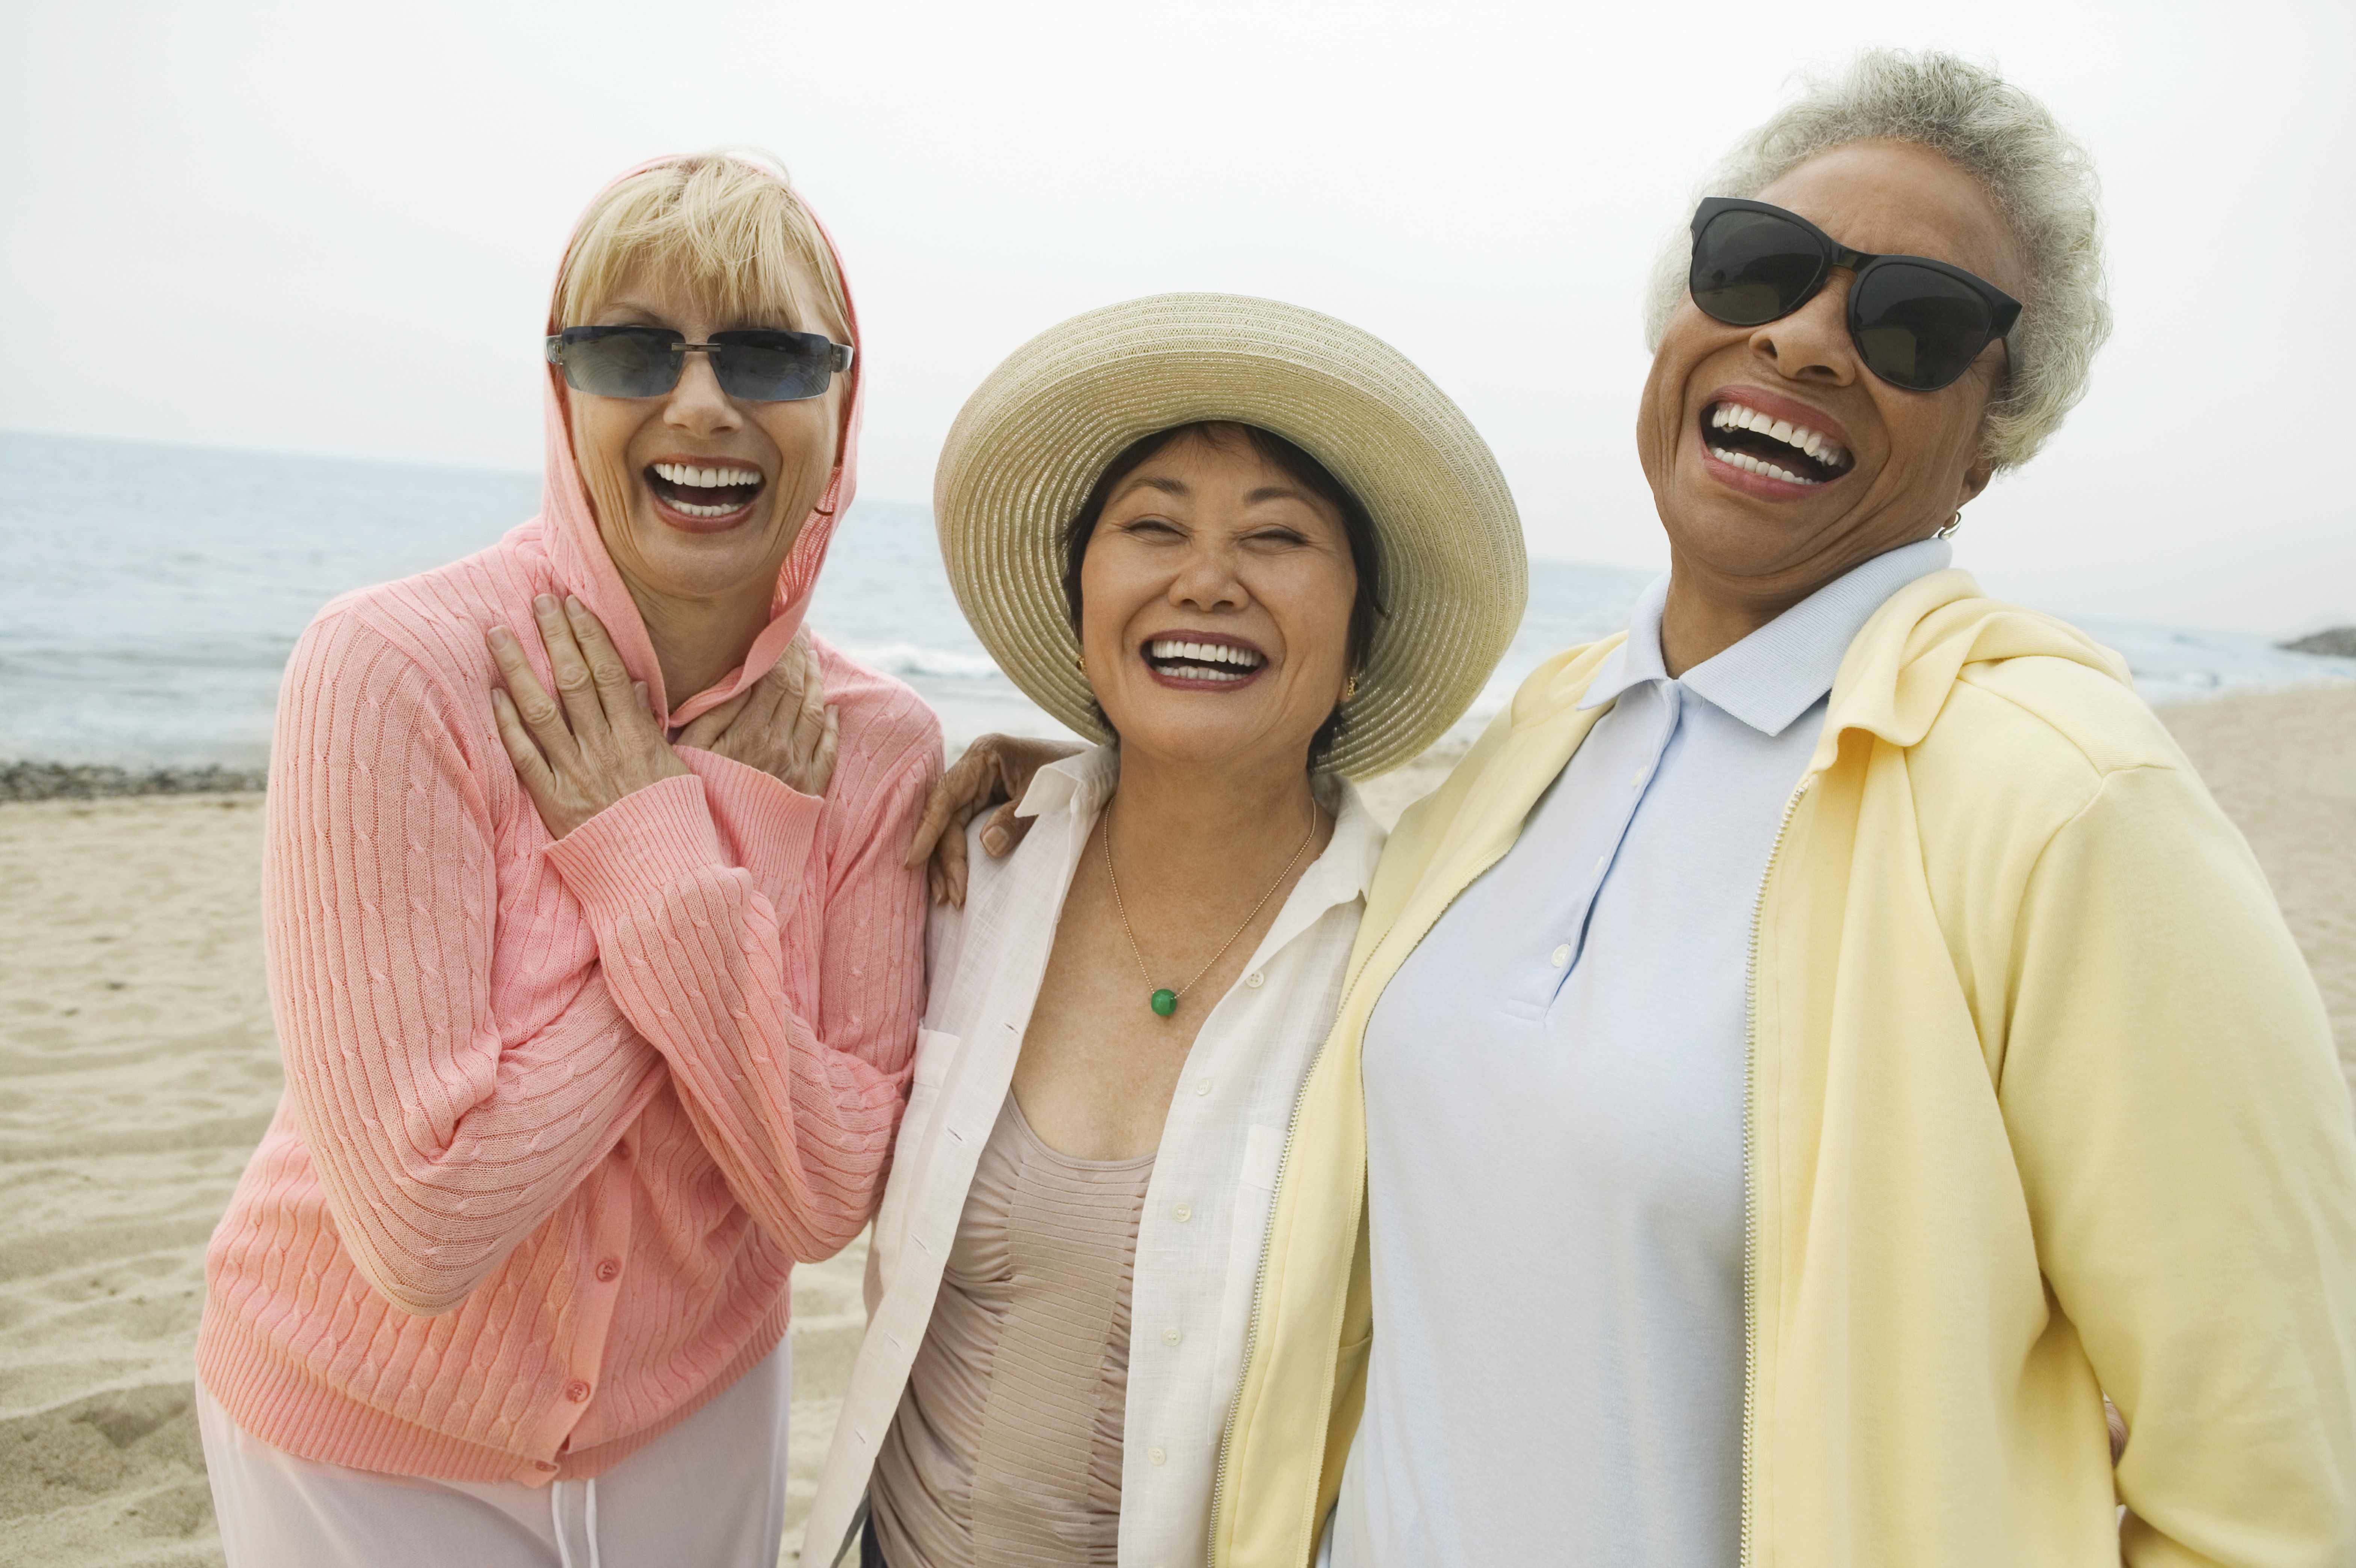 a group of diverse, middle-aged women friends walking on the beach and laughing